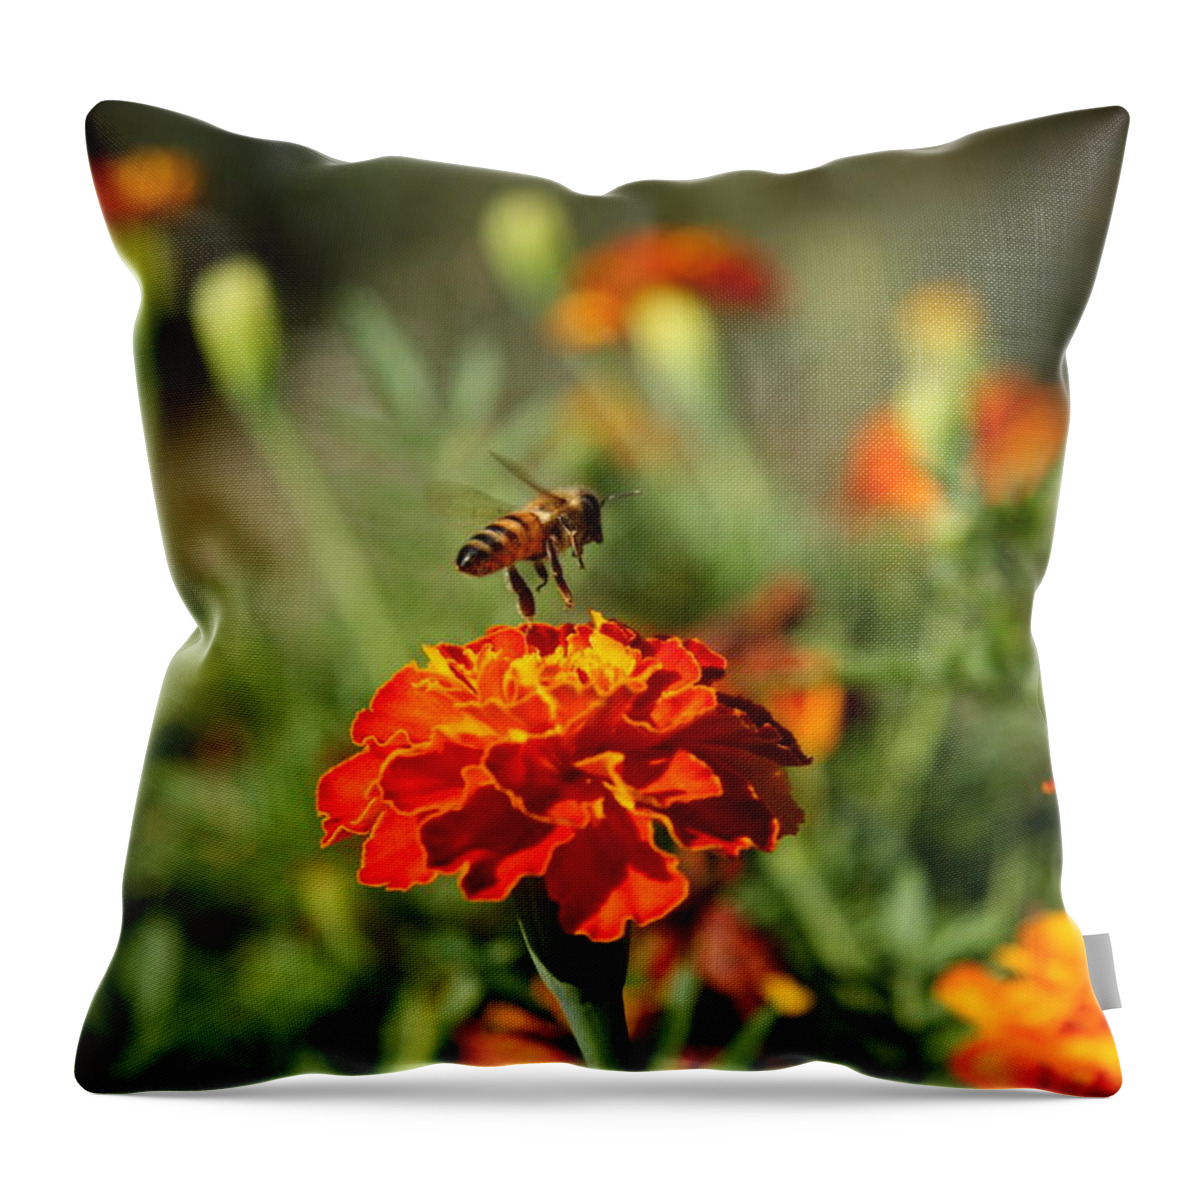  Throw Pillow featuring the photograph In Cerca Di Nettare by Simone Lucchesi